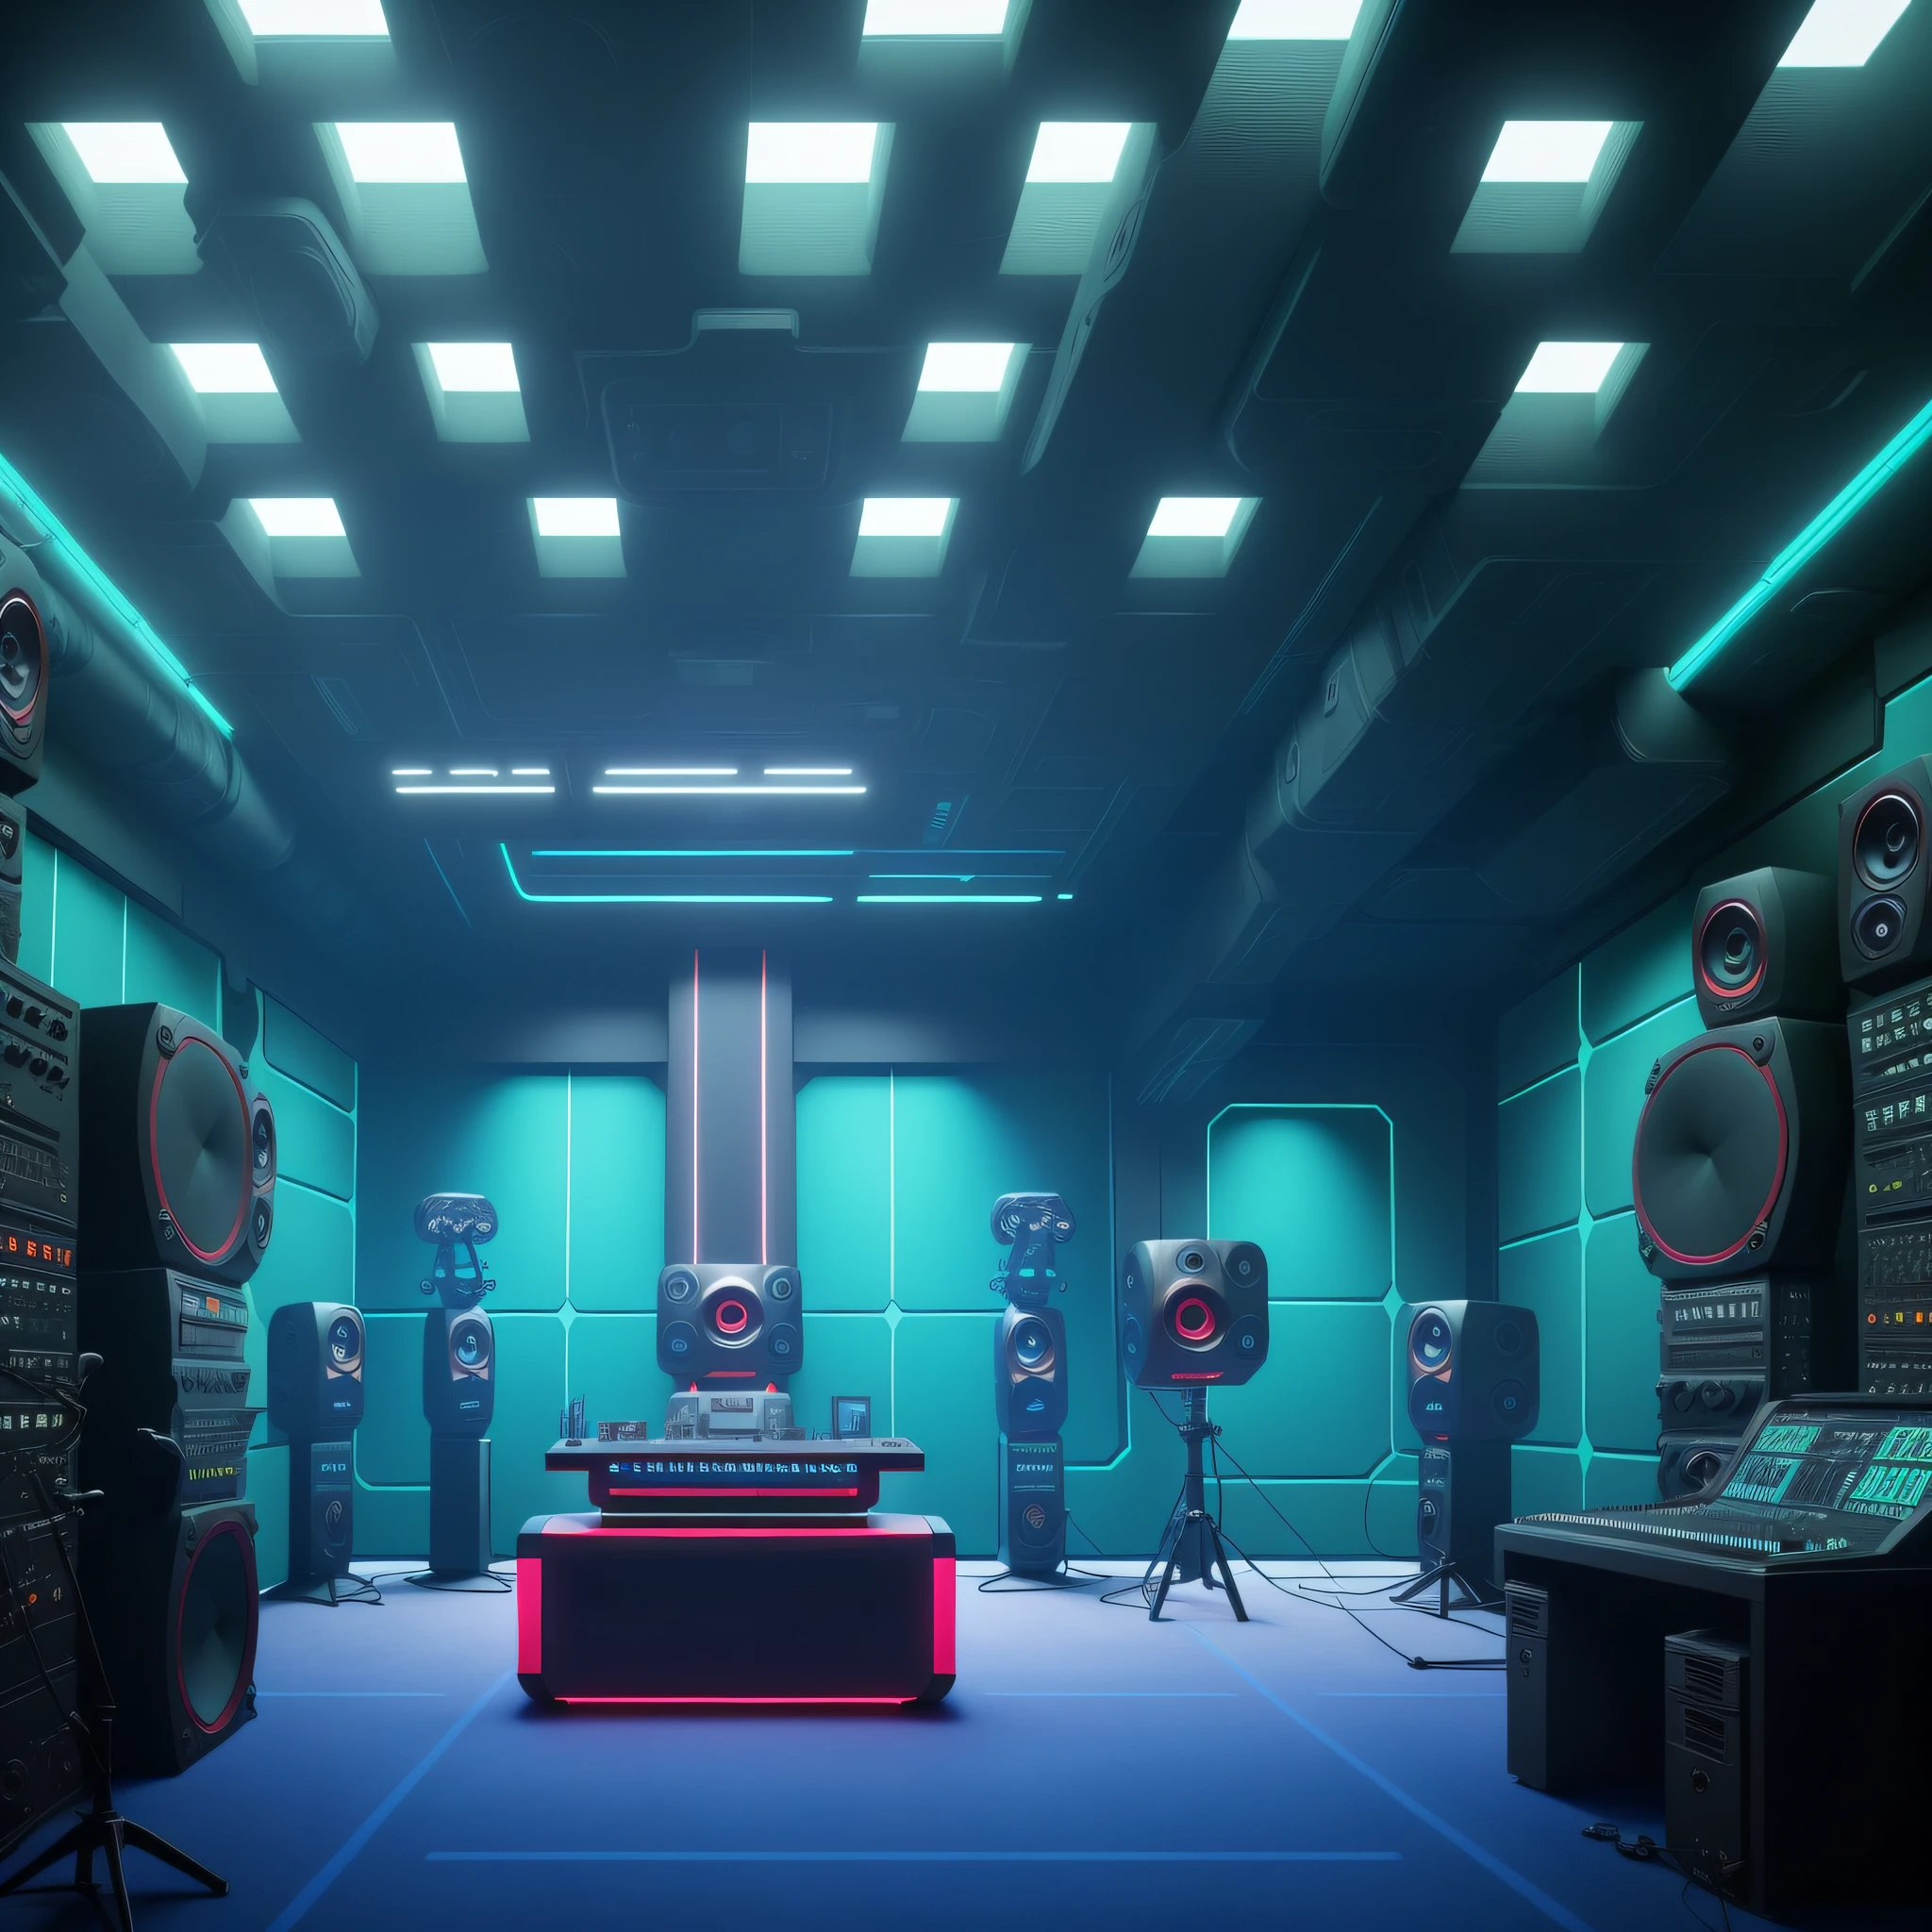 (back stage of a recording studio with a futuristic theme, which mimics the interior of a spaceship) inside ((scrbackrooms)),A futuristic recording studio that mimics the interior of a spaceship, with floating cameras, minimalist background with LED monitors, clear environment, predominant white color, with neo punk style details